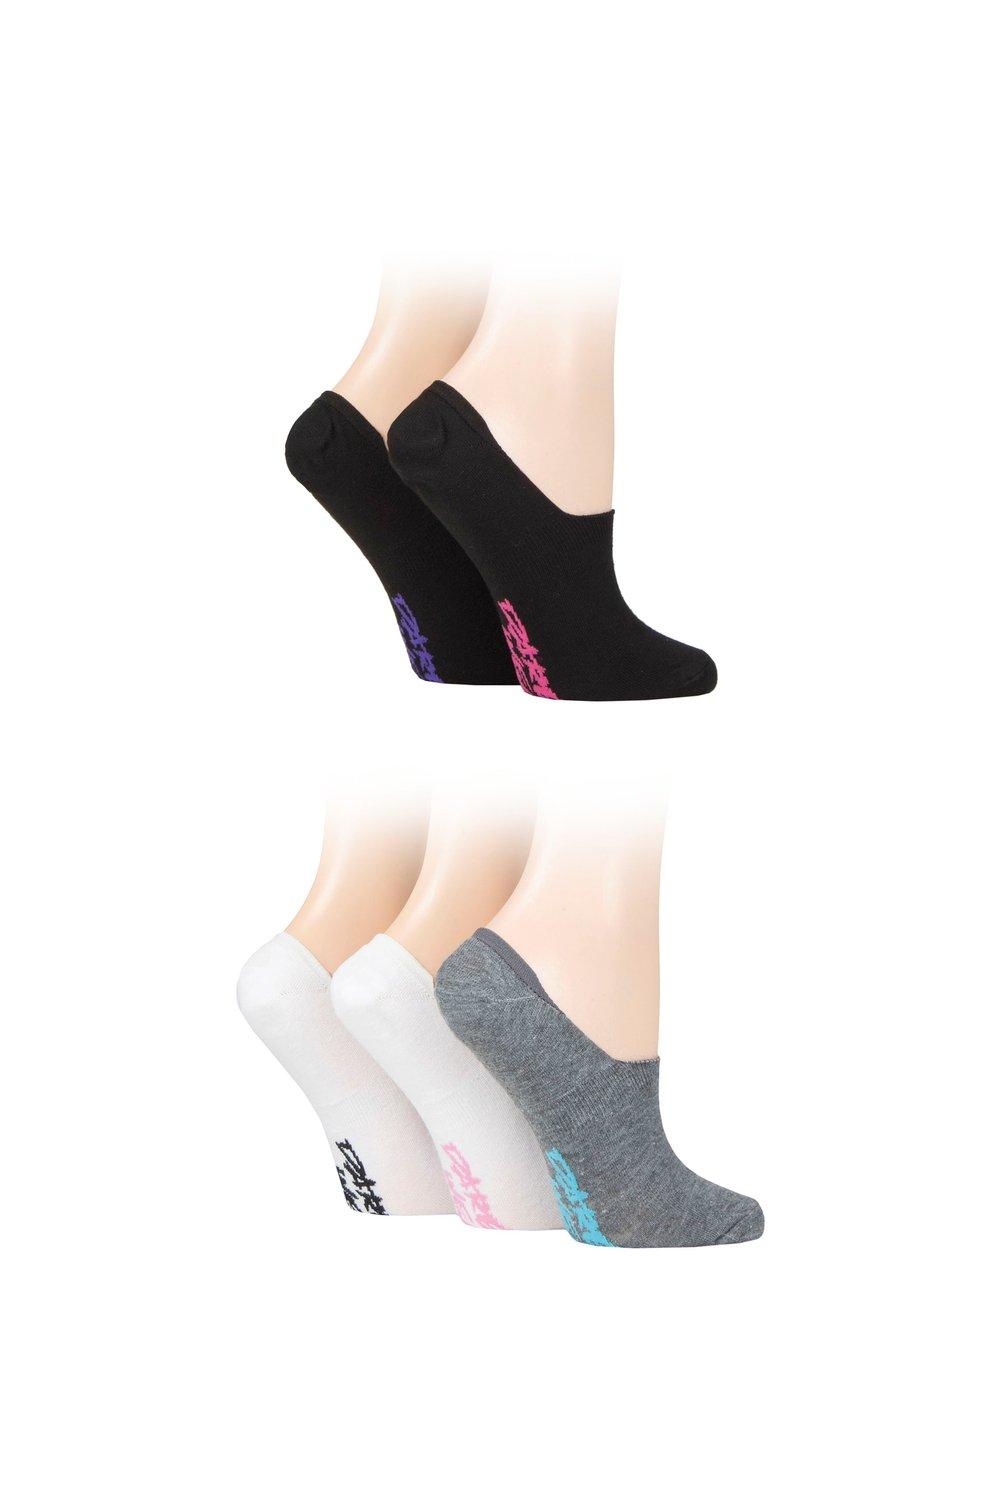 5 Pair Dare to Wear No Show Socks